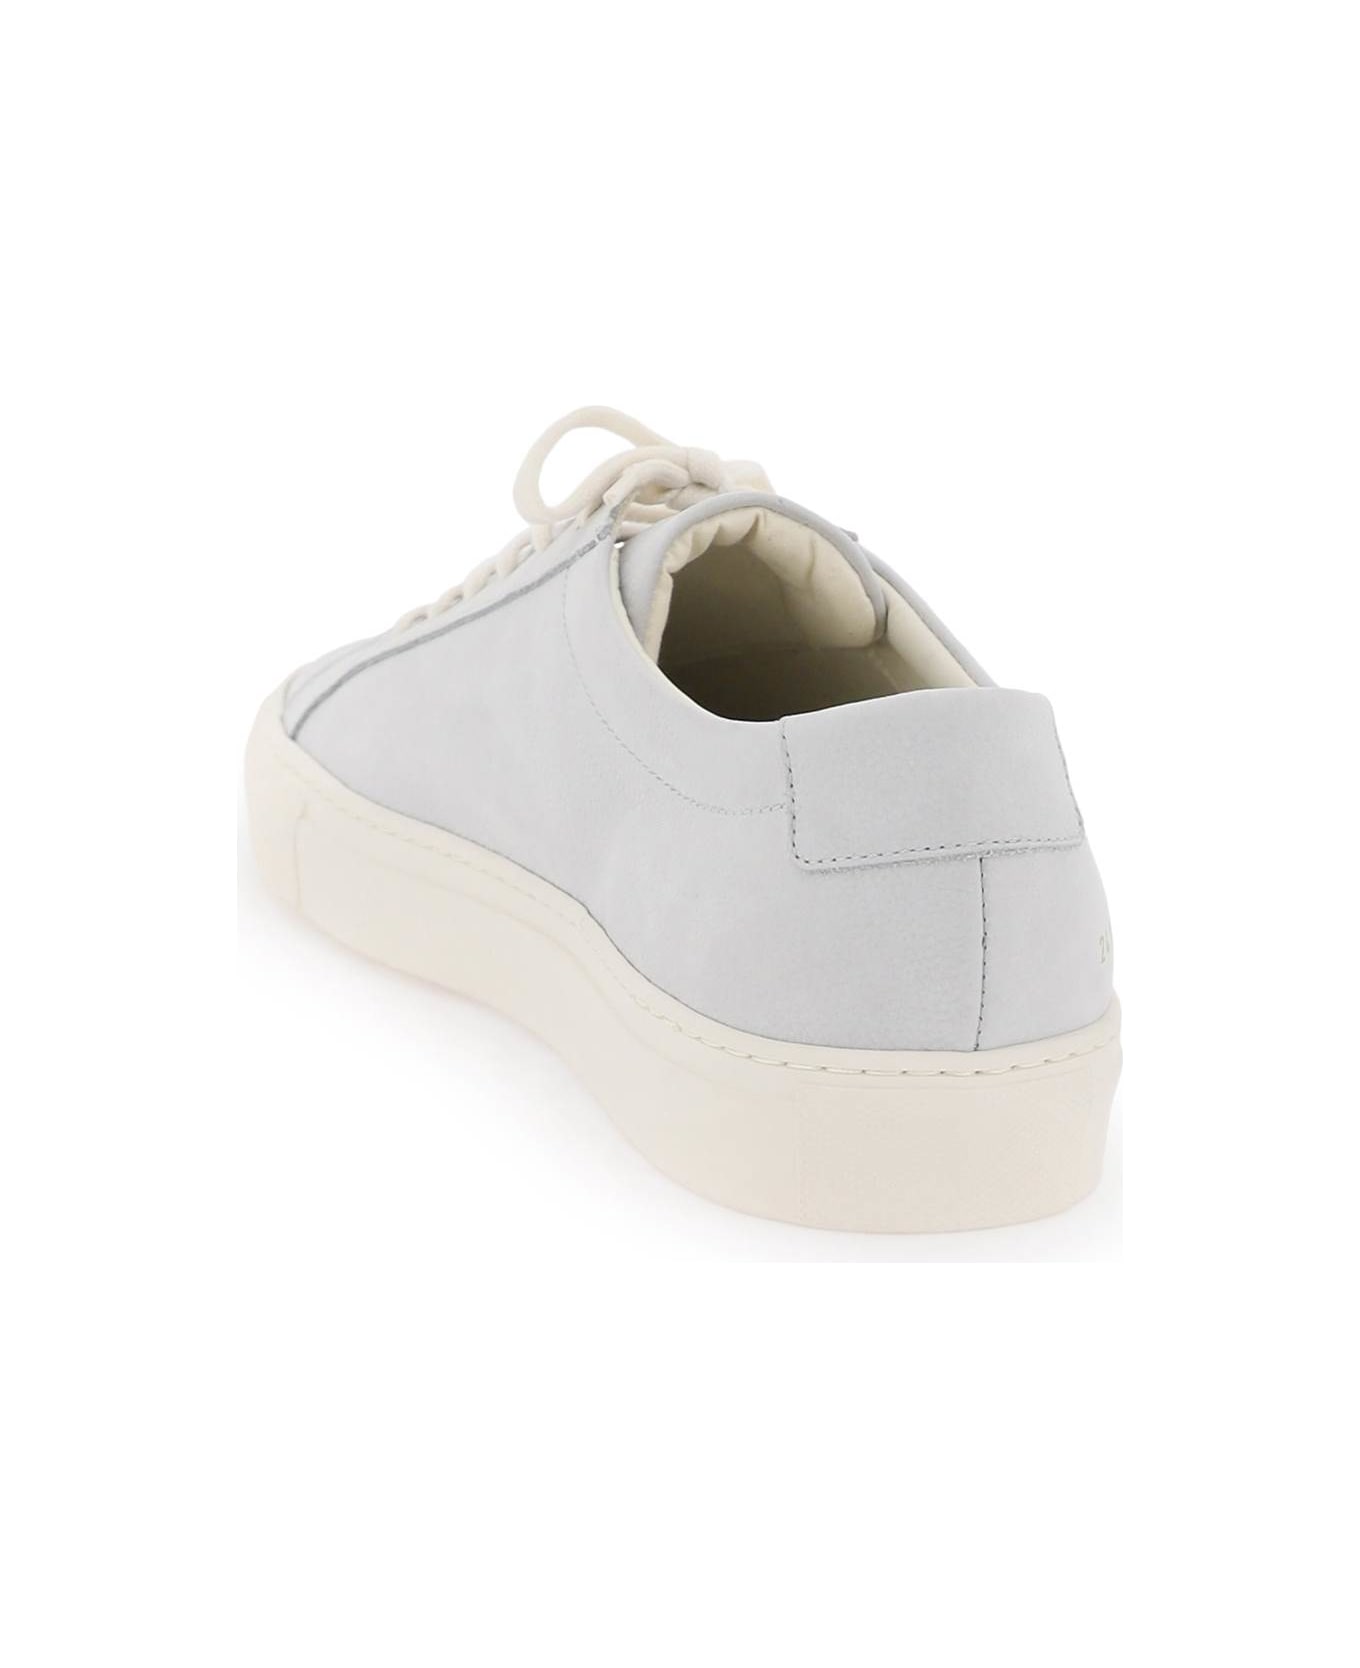 Common Projects Original Achilles Leather Sneakers - GREY スニーカー